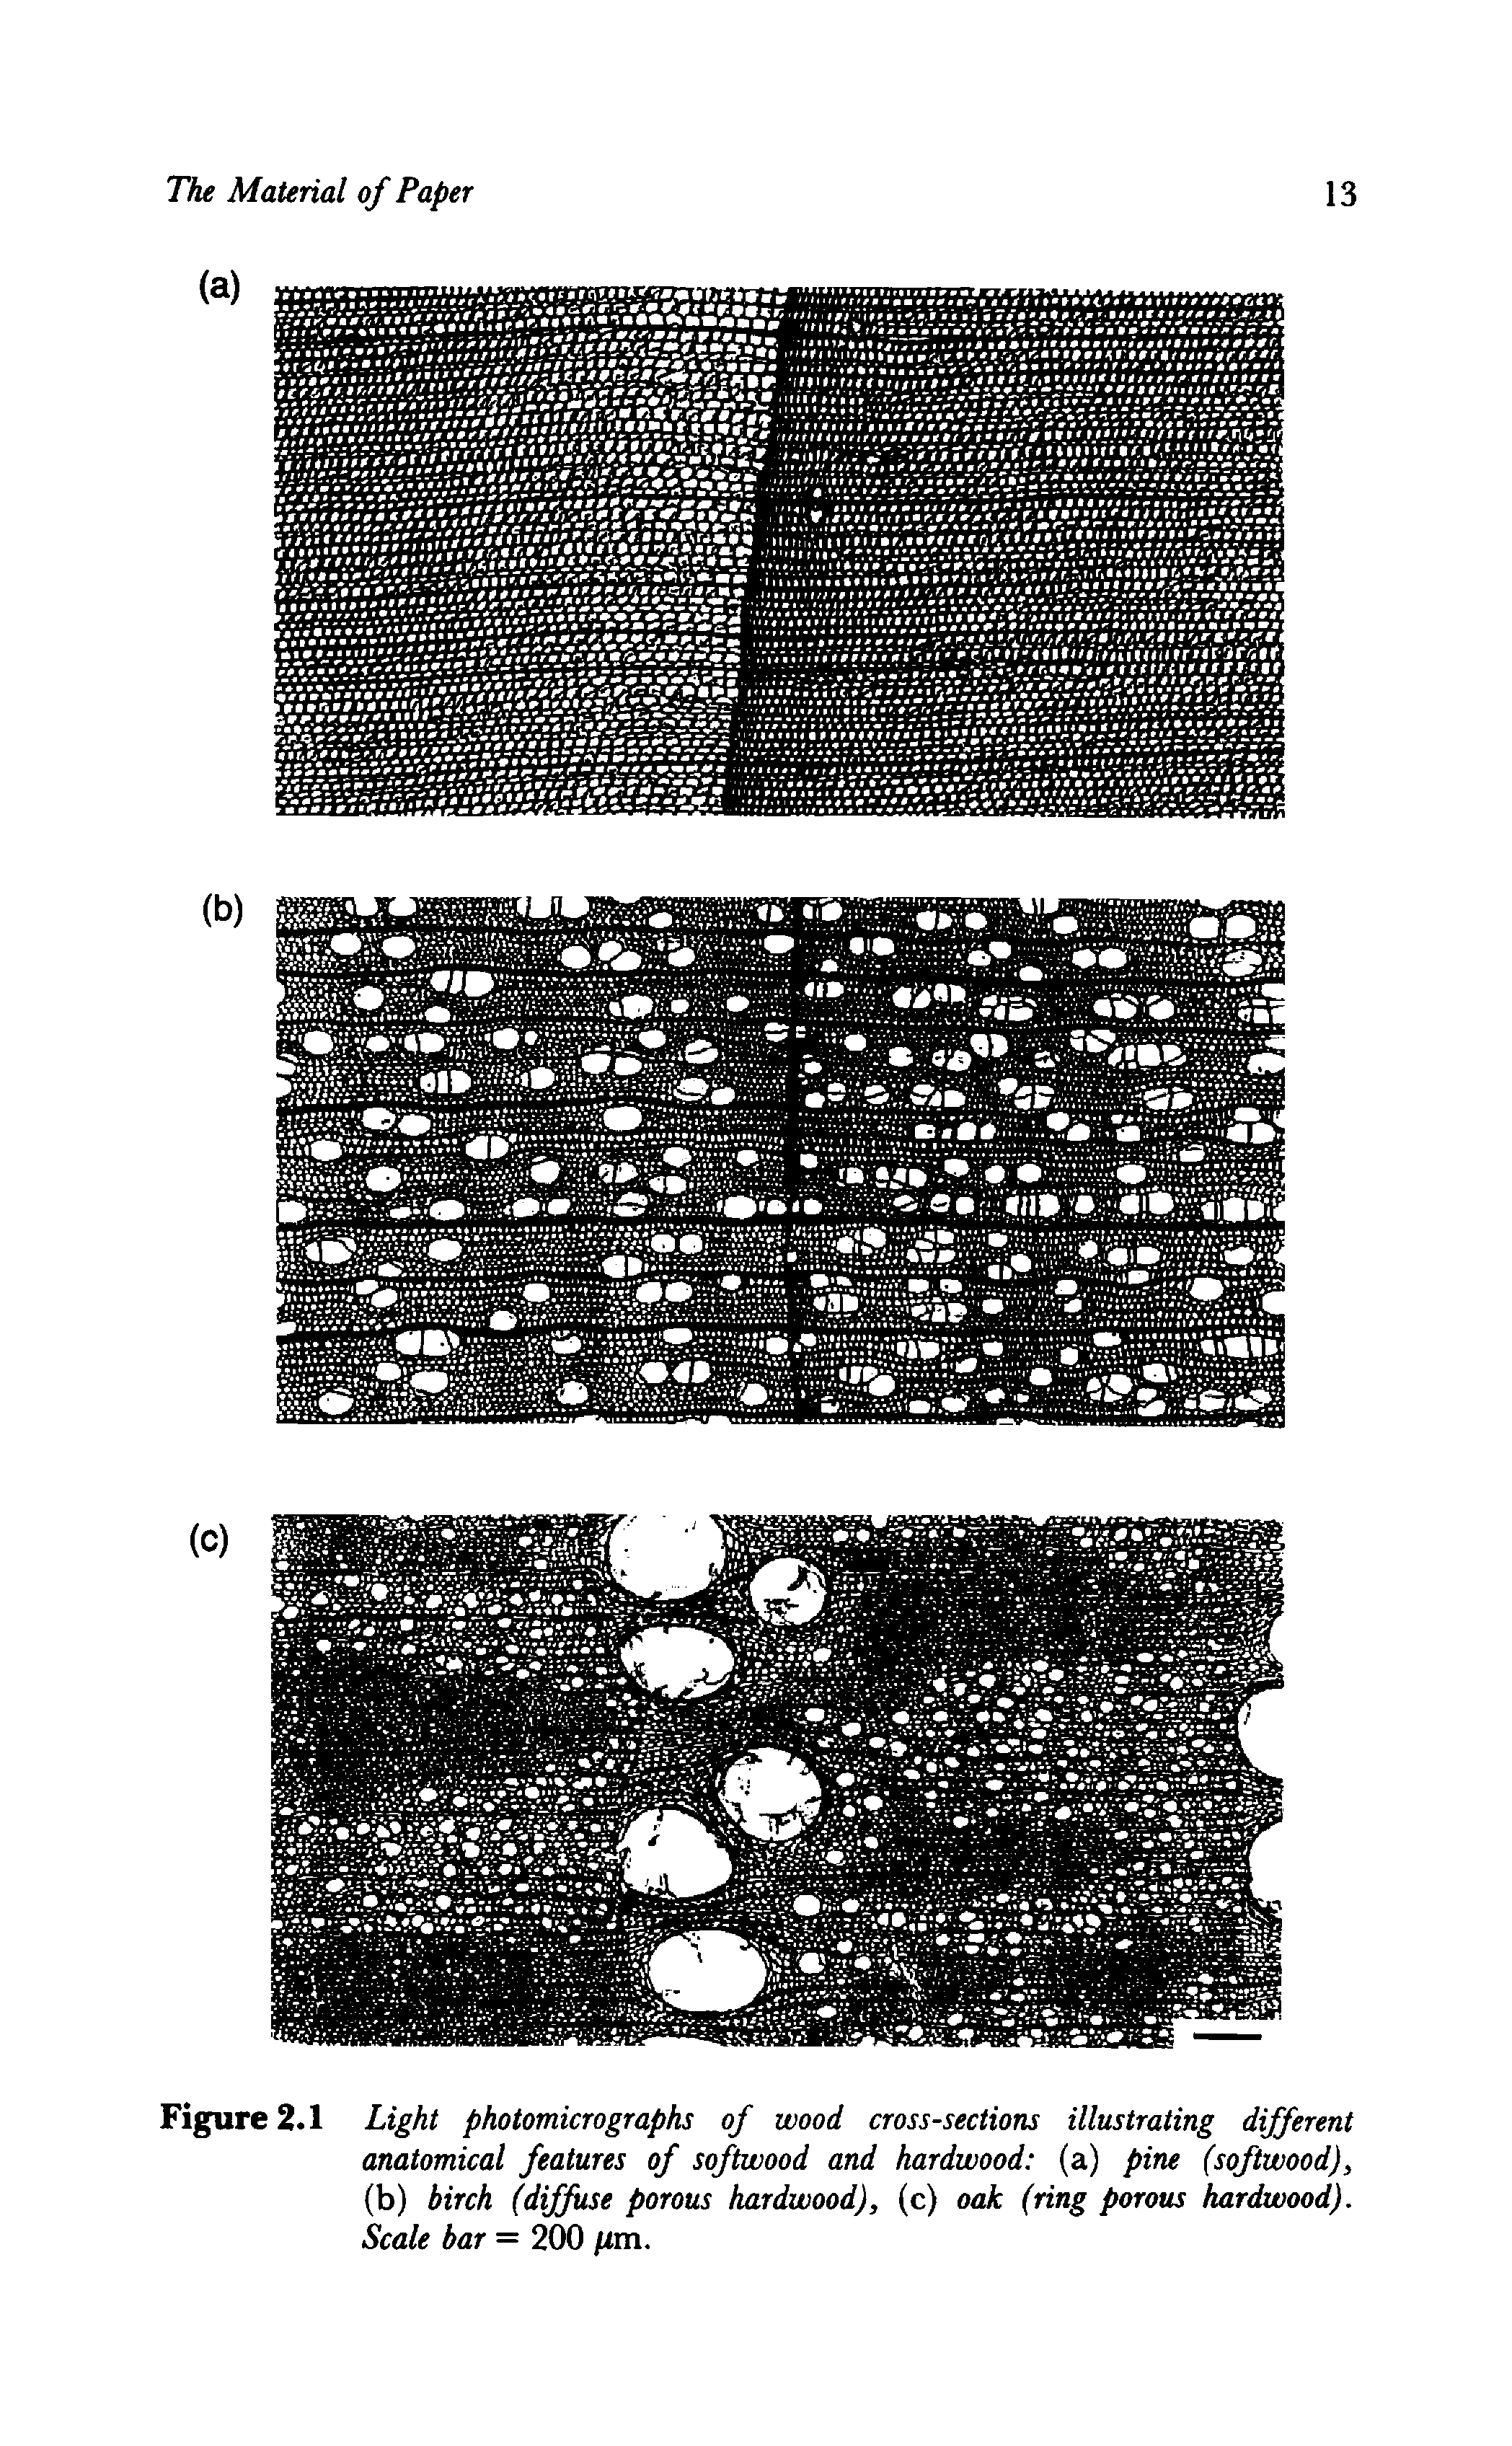 Figure 2.1 Light photomicrographs of wood cross-sections illustrating different anatomical features of softwood and hardwood (a) pine (softwood), (b) birch (diffuse porous hardwood), (c) oak (ring porous hardwood). Scale bar = 200 m.